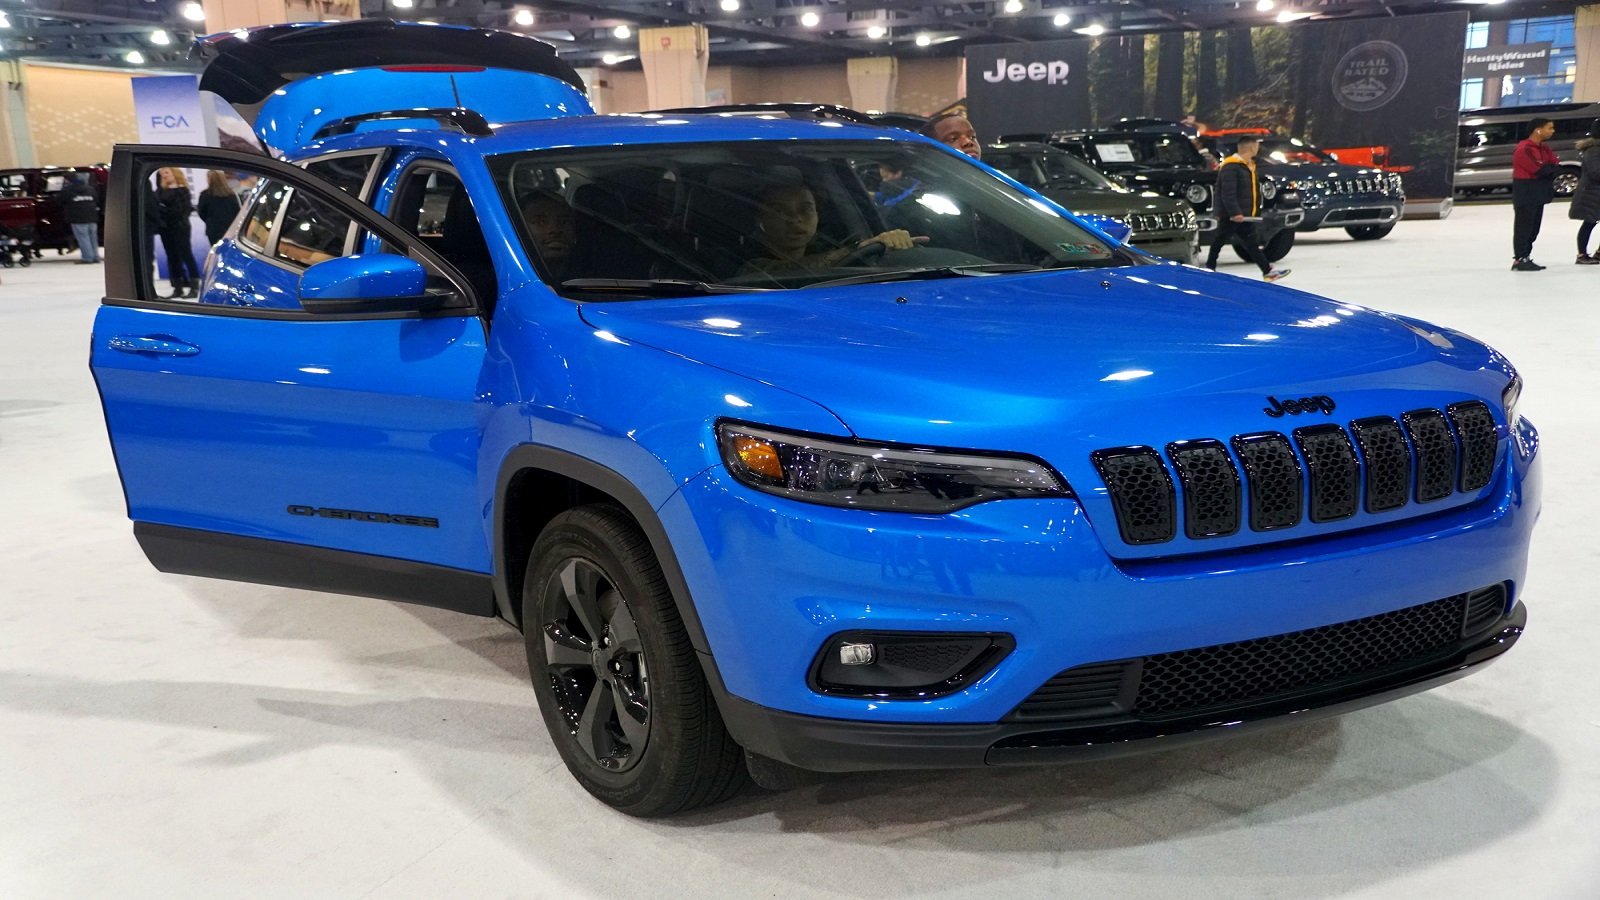 <p>Known for its ruggedness, it could be a great choice if you’re seeking a durable vehicle that can surpass 300,000 miles.</p><p>A 2019 or newer Cherokee is said to have the potential to reach up to <strong>175,000 to 350,000 miles</strong> in its lifespan. It’s worth noting that these models may face some drivetrain issues, which might require replacing major components.</p>